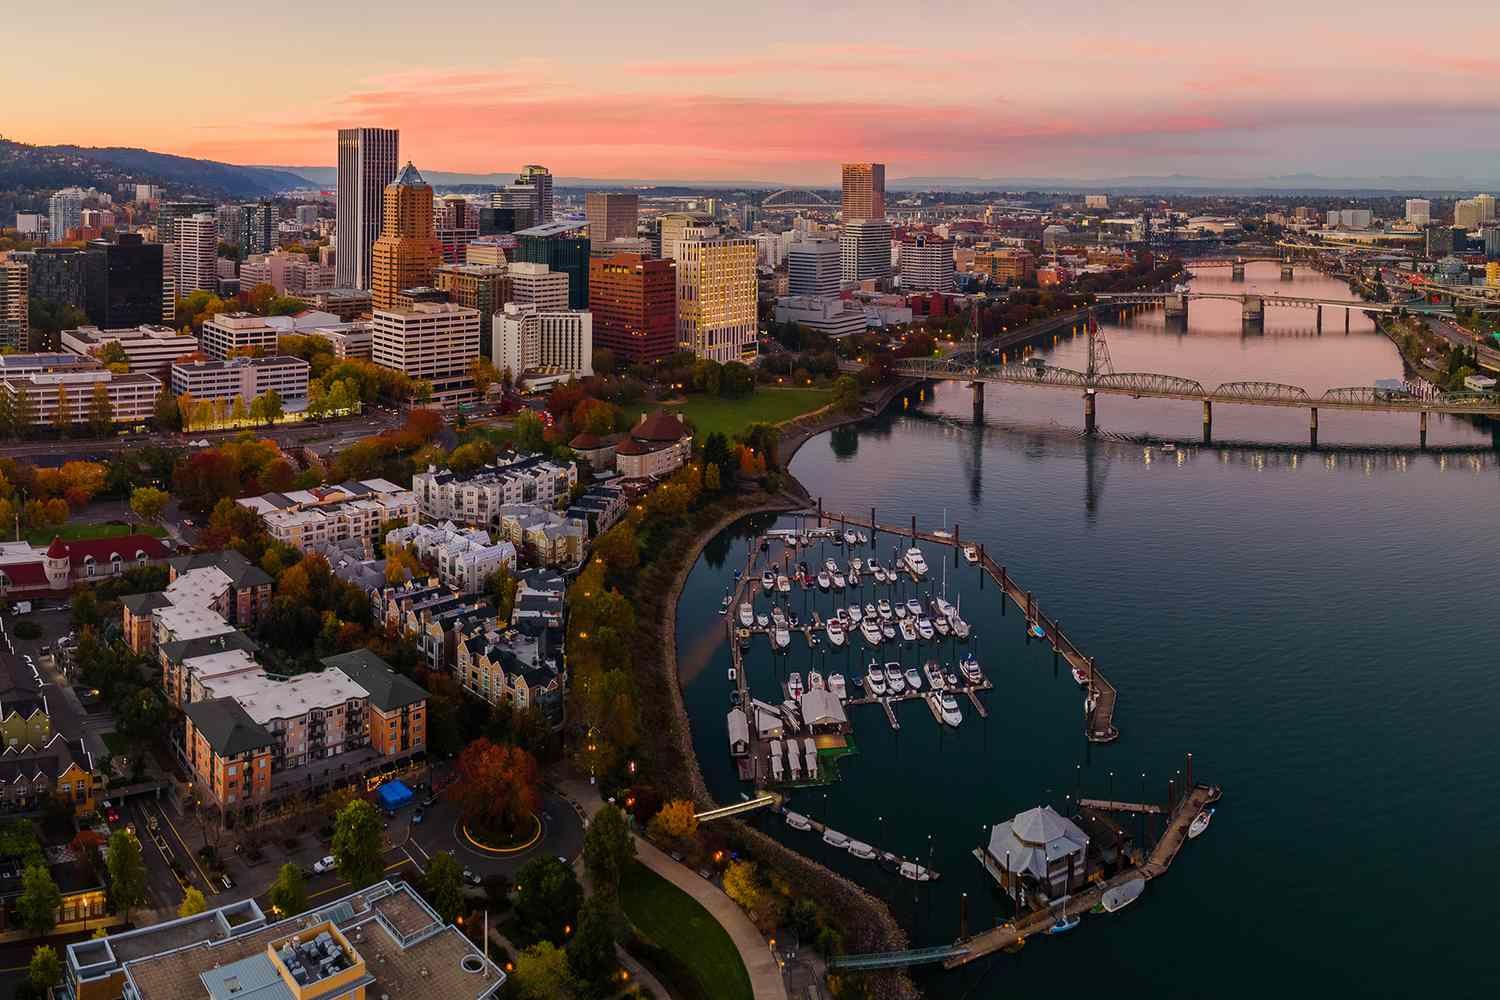 Downtown Portland Oregon, including a river to the right of the frame and a skyline to the left, all shown at dusk.